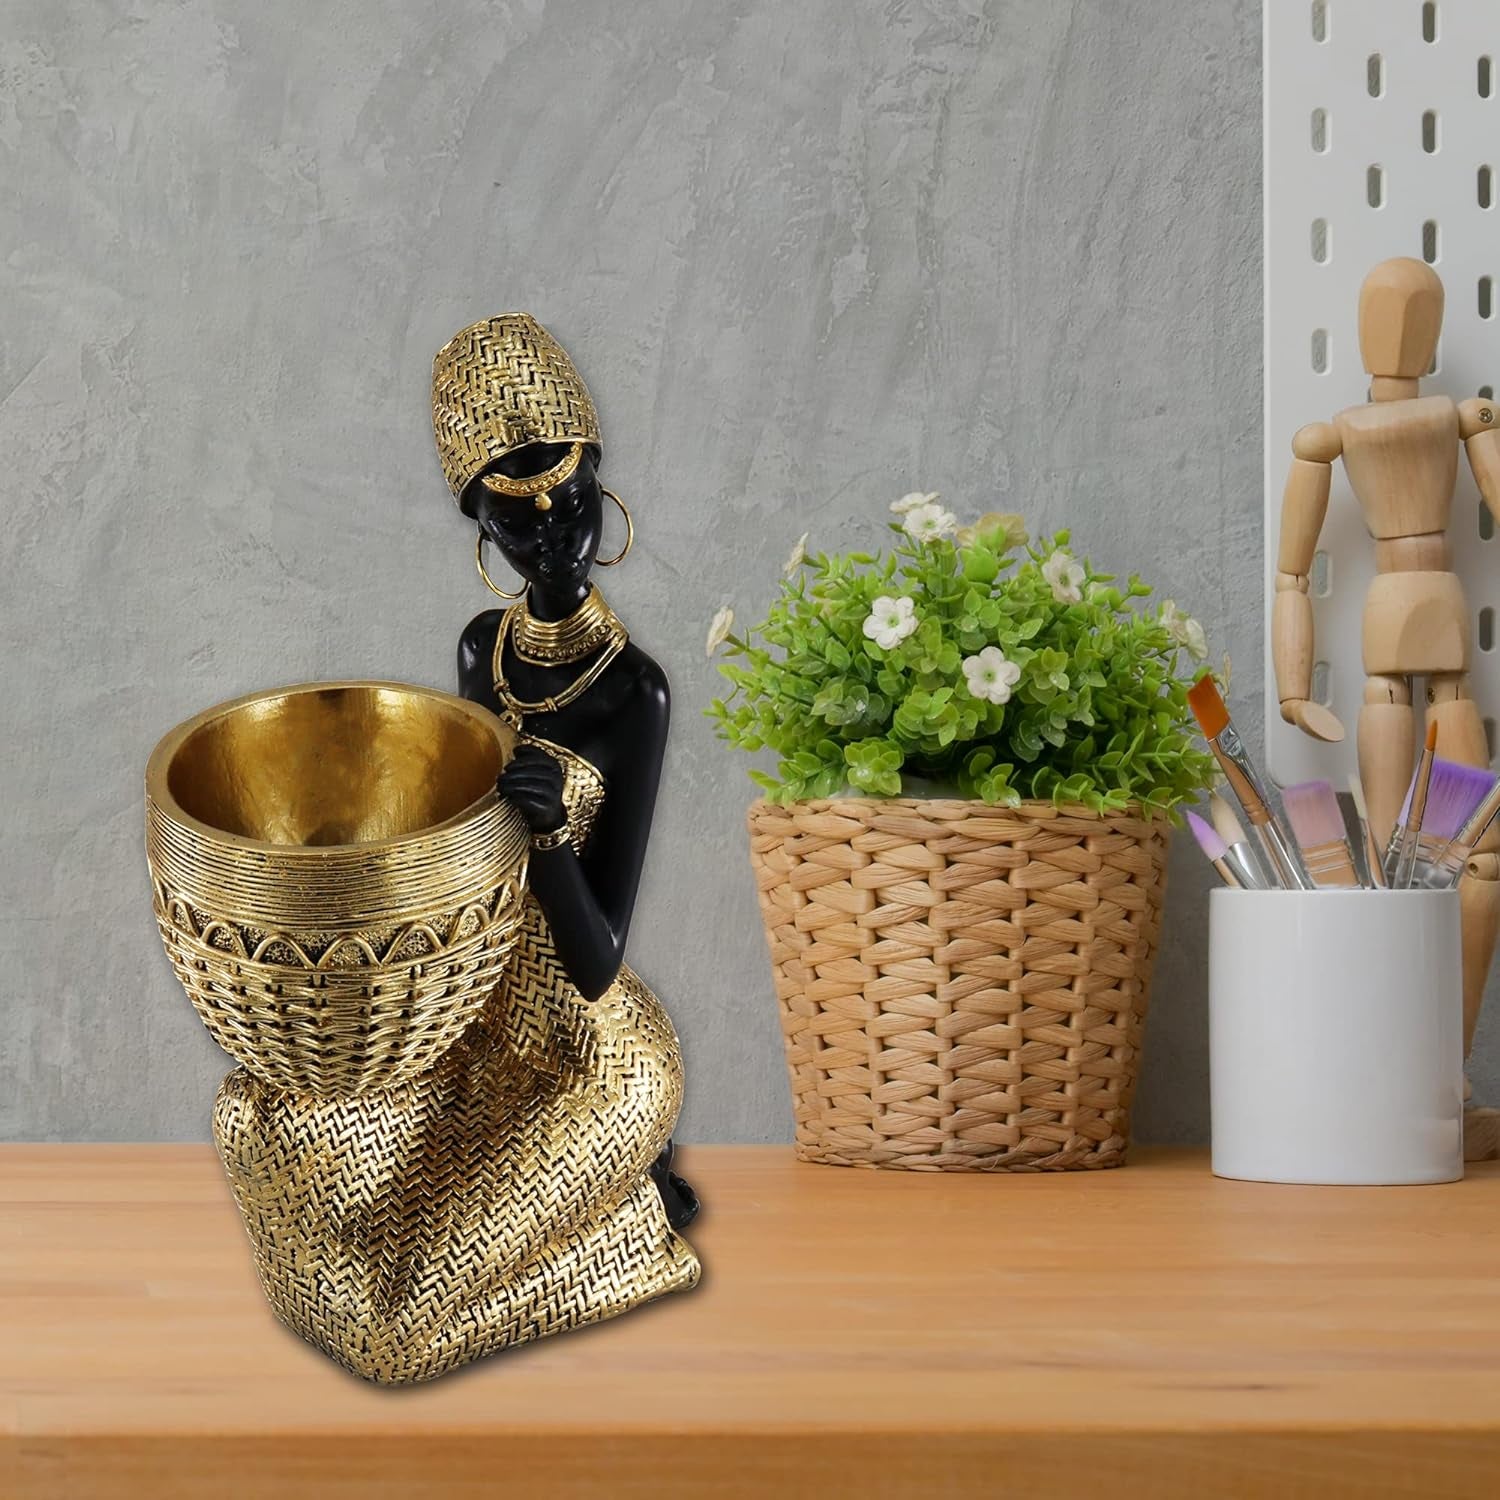 African Statues and Sculptures for Home Decor, Tribal Art Figurines for Living Room Decorations, Gold Vintage Aesthetic Ornament for Bookshelf and Tables, Housewarming Gifts for Women